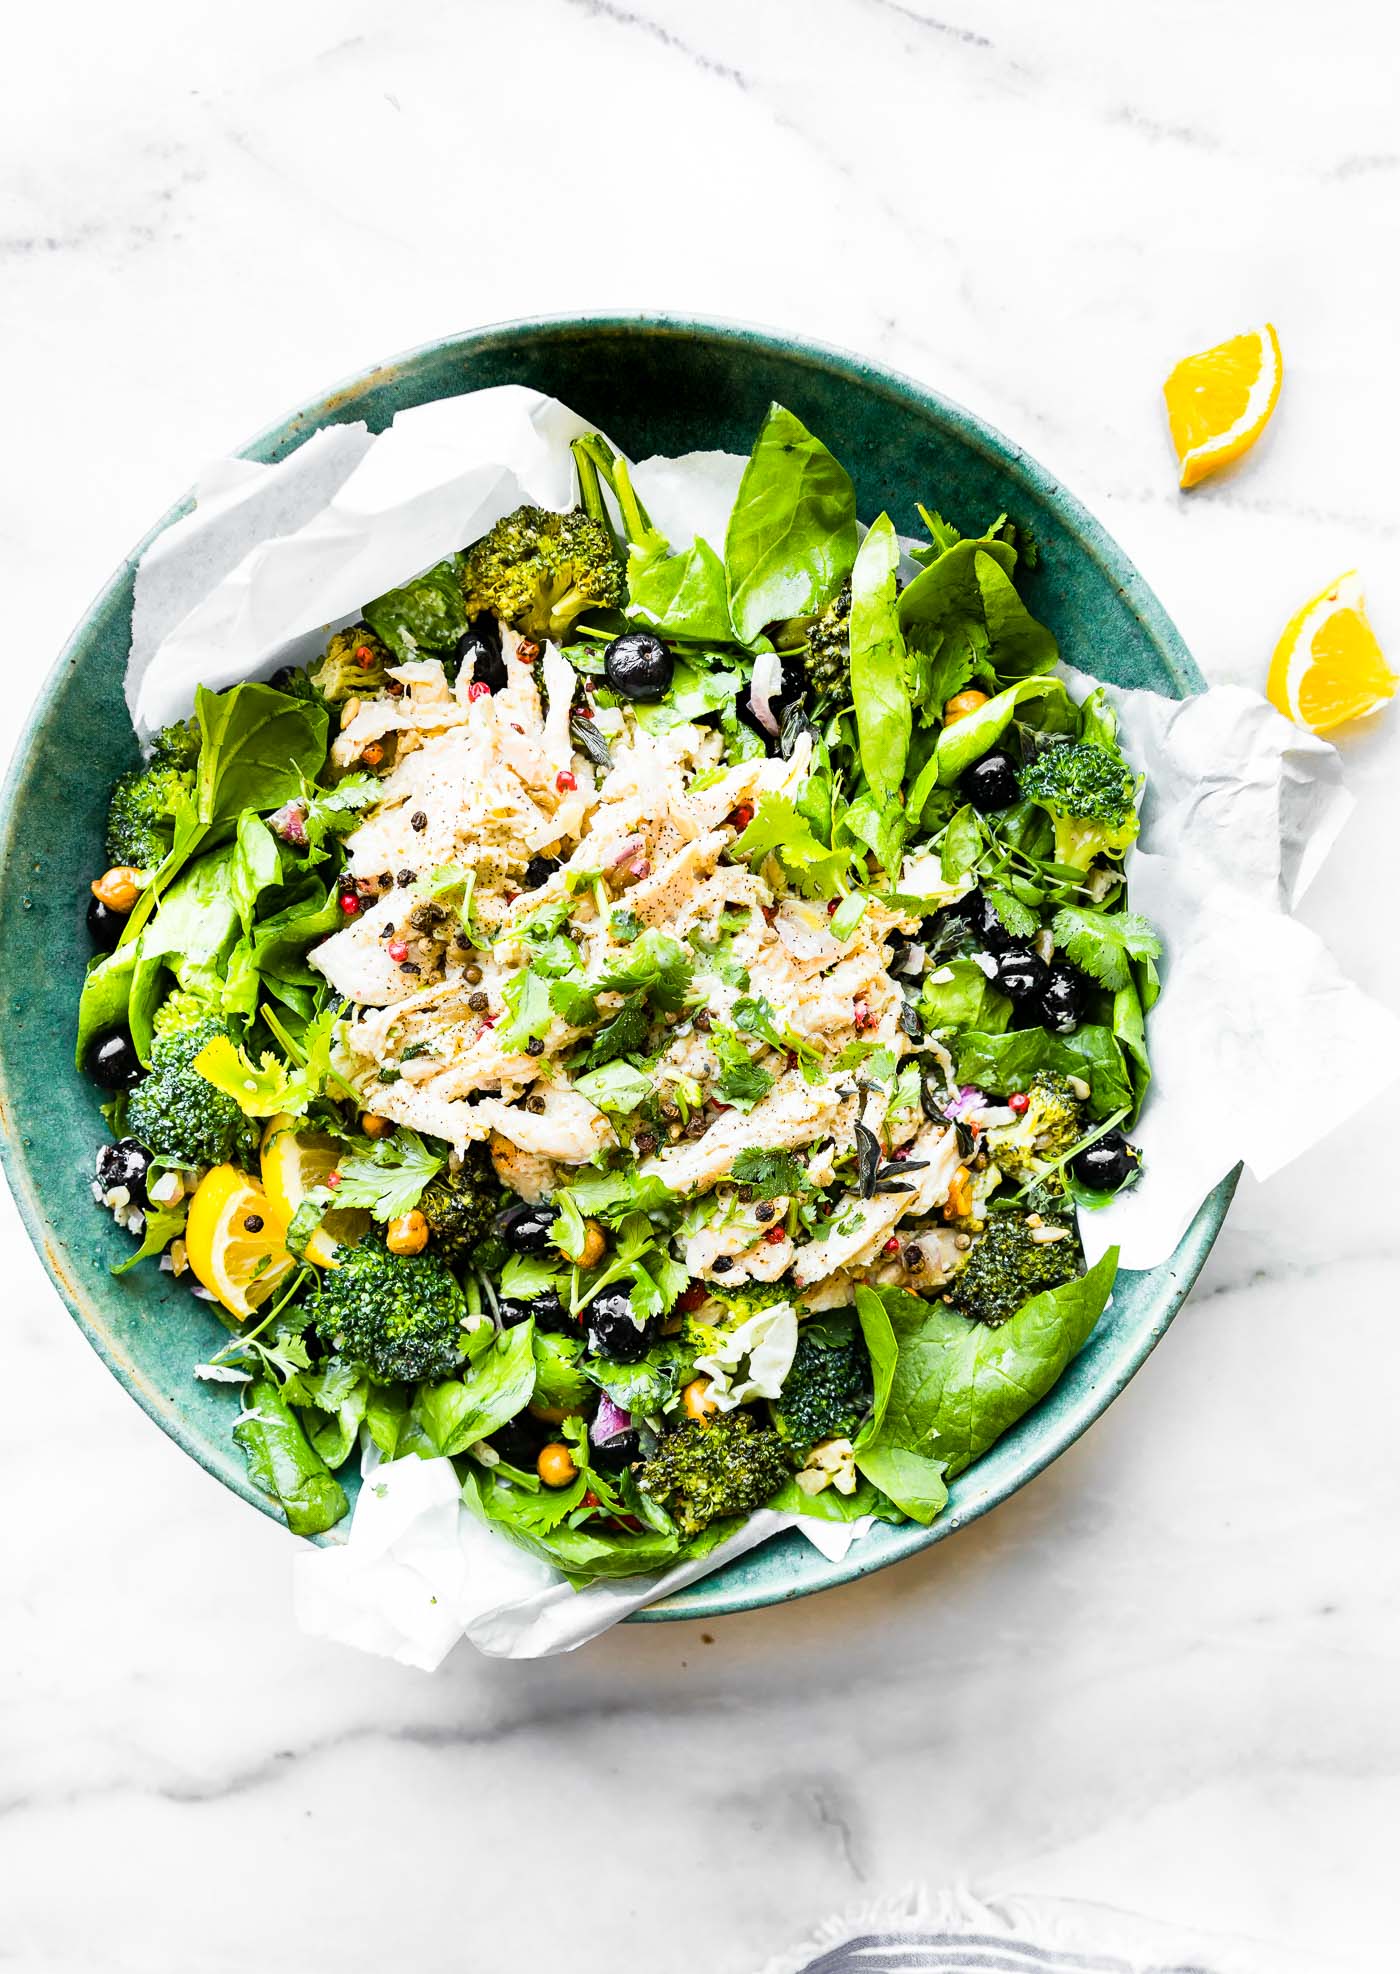 A lightened up Mayo Free Chicken Salad! A chicken salad bowl that's perfect for a healthy meal or side dish. Spinach, roasted broccoli, berries, chickpeas, roasted chicken, and herbs tossed in a light yogurt olive oil dressing. #cleaneating #salad #chicken #glutenfree